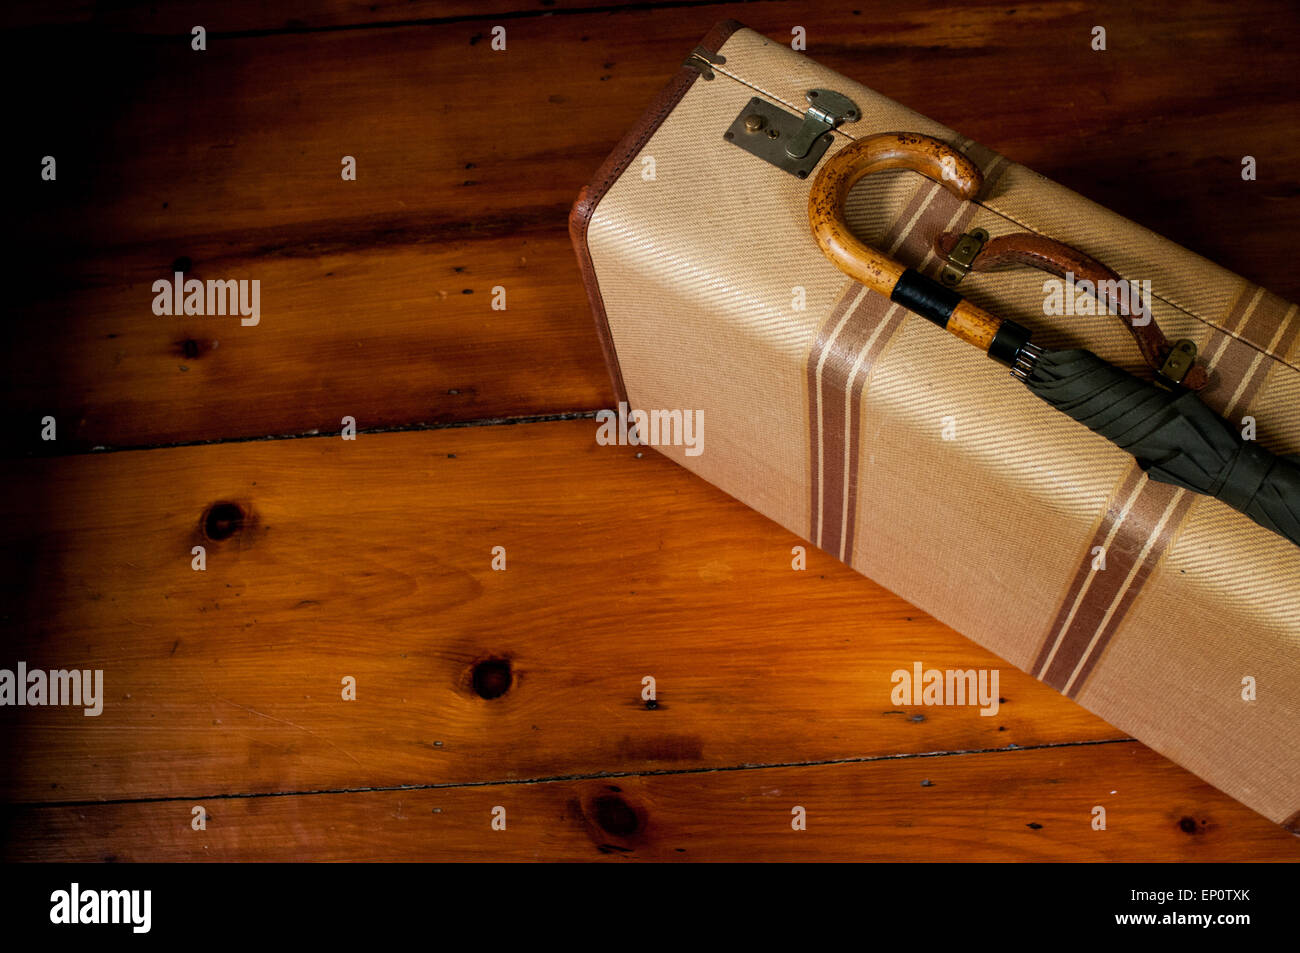 A vintage suitcase and umbrella sit on a wood floor. Stock Photo